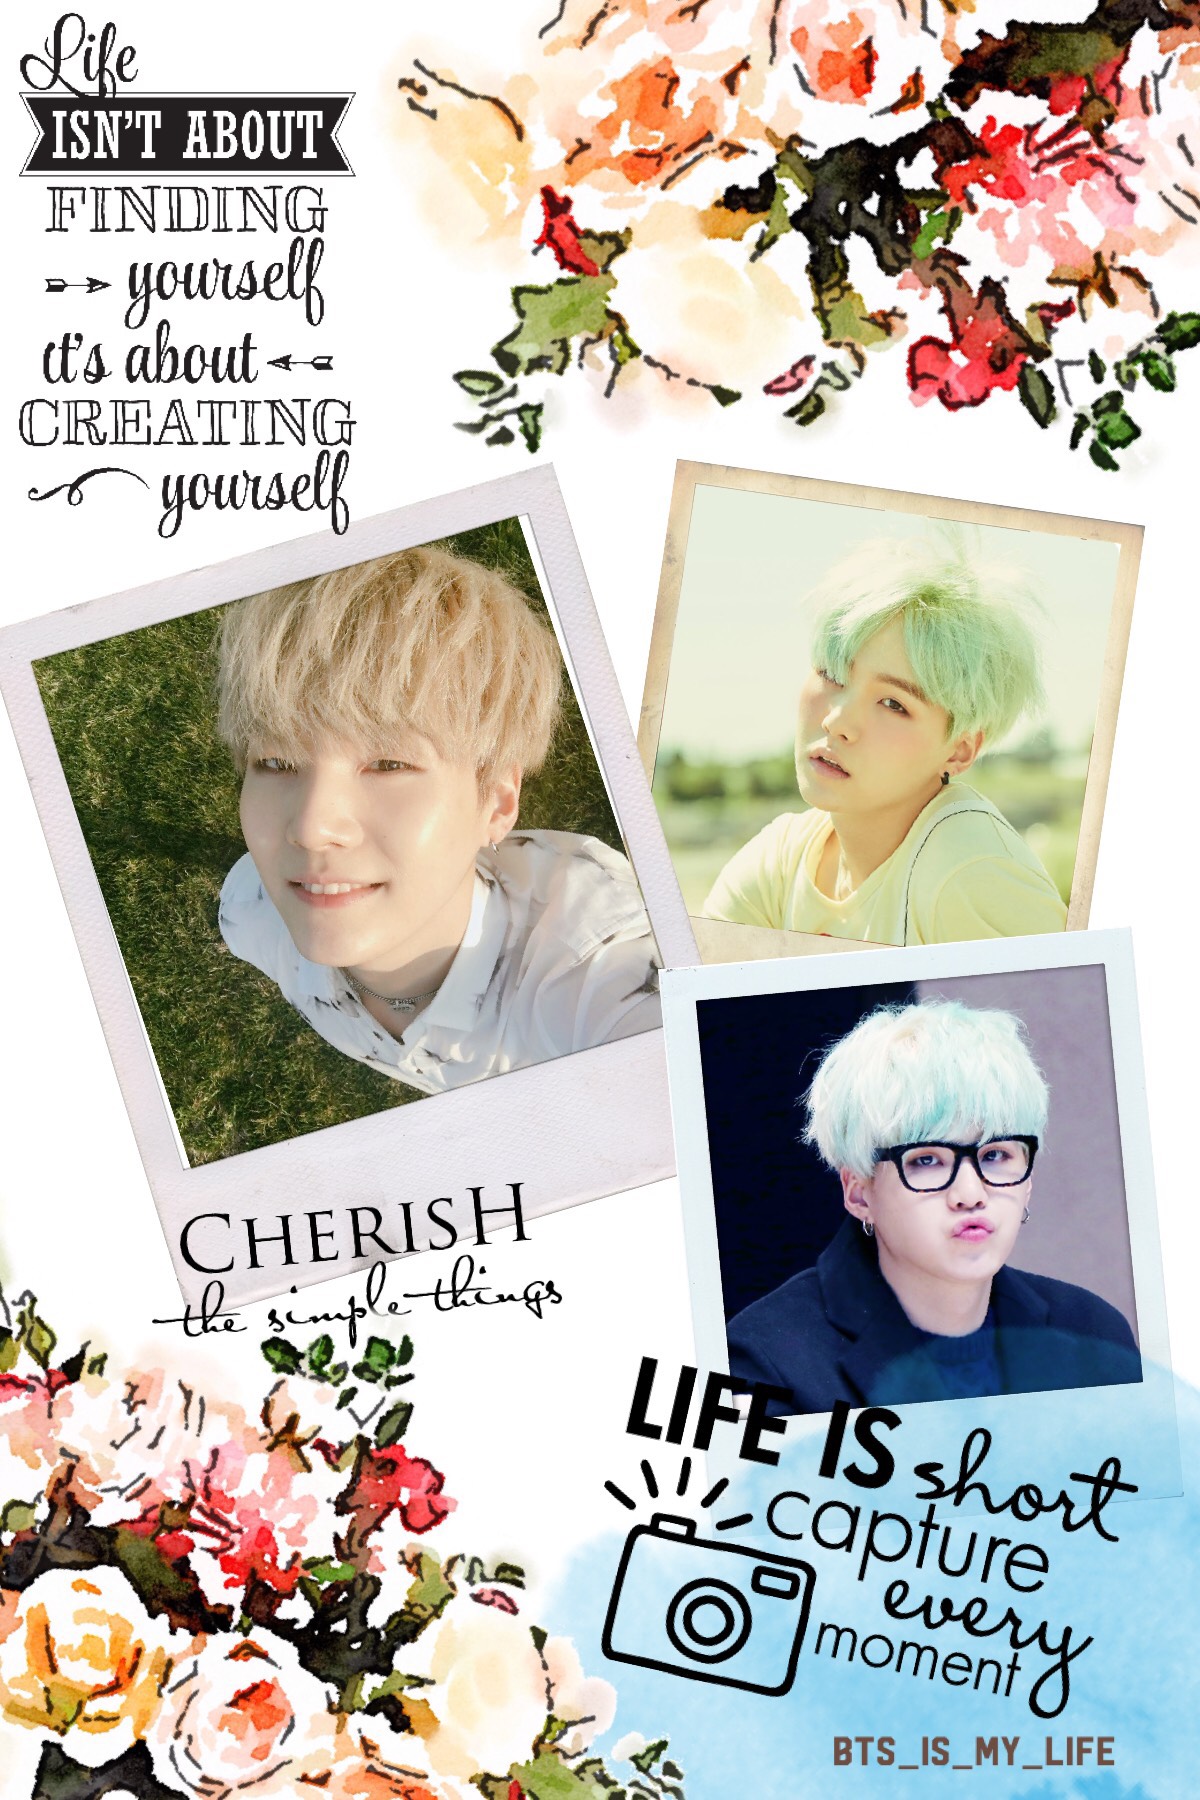 Collage by Bts_is_my_l1fe